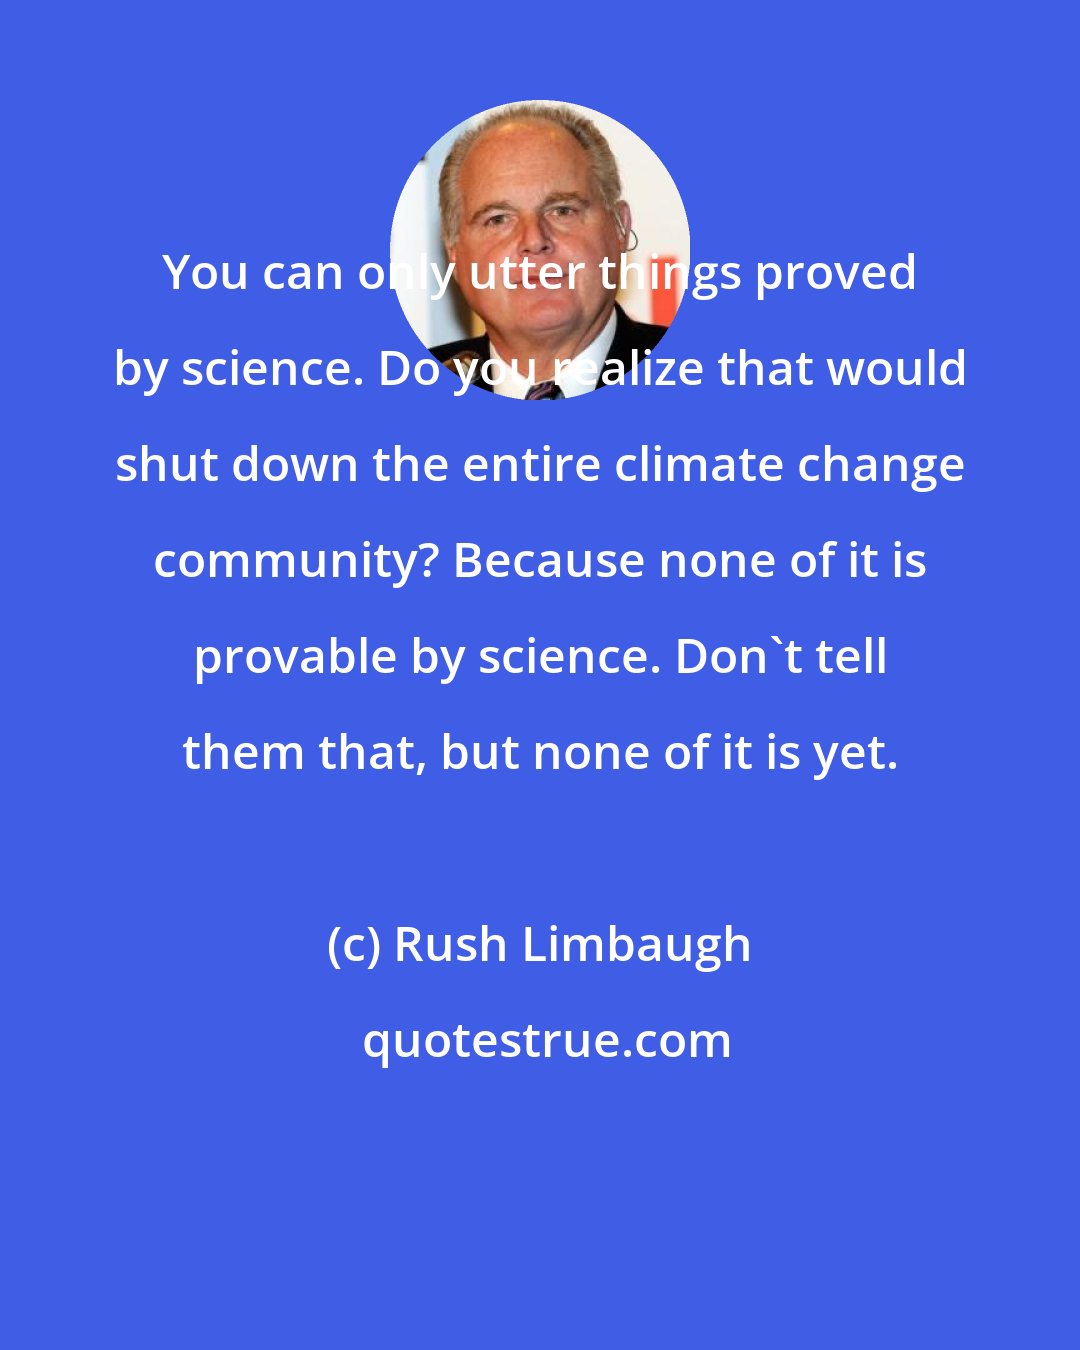 Rush Limbaugh: You can only utter things proved by science. Do you realize that would shut down the entire climate change community? Because none of it is provable by science. Don't tell them that, but none of it is yet.